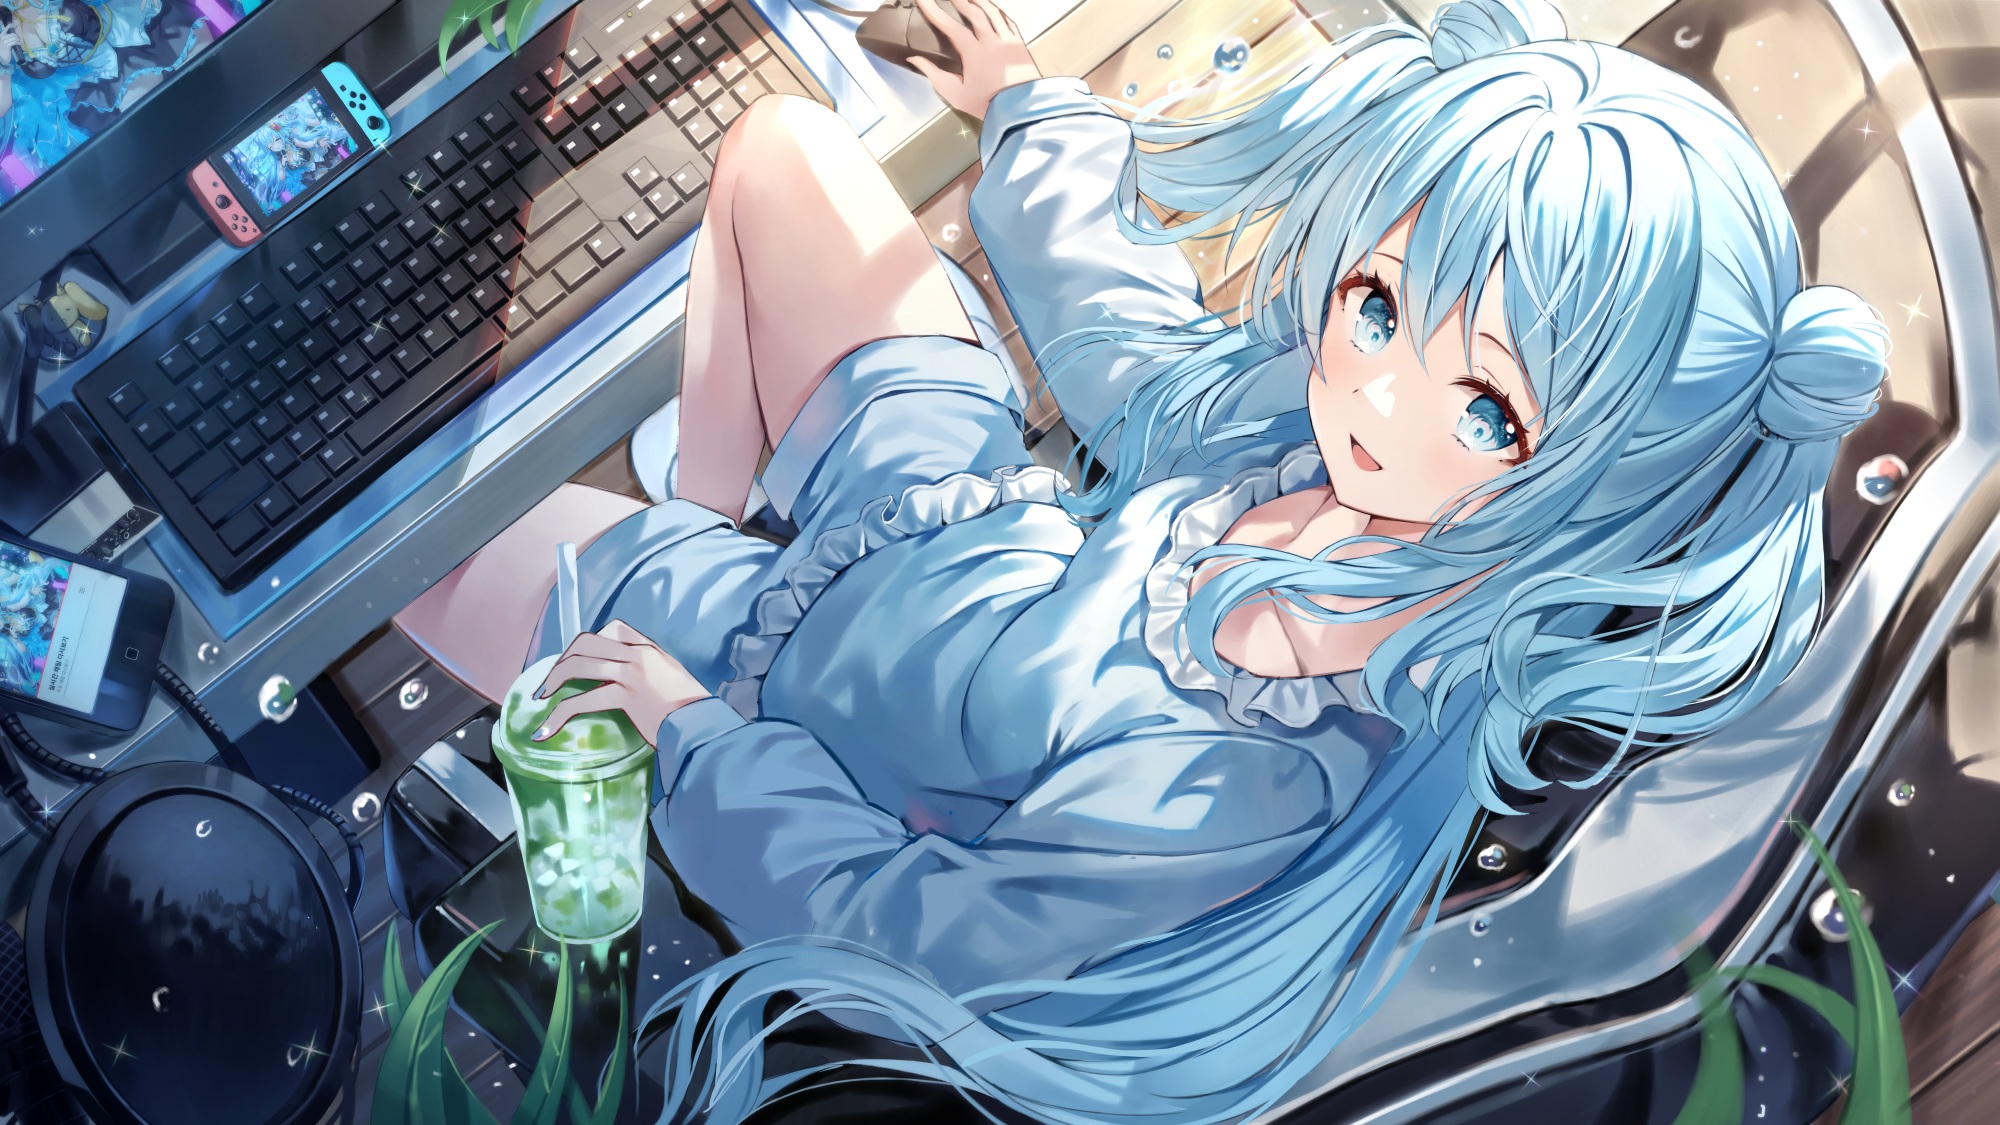 Anime Anime Girls Blue Hair Blue Eyes Drink Nintendo Switch Phone Twintails Water Drops Keyboards Lo 2000x1125